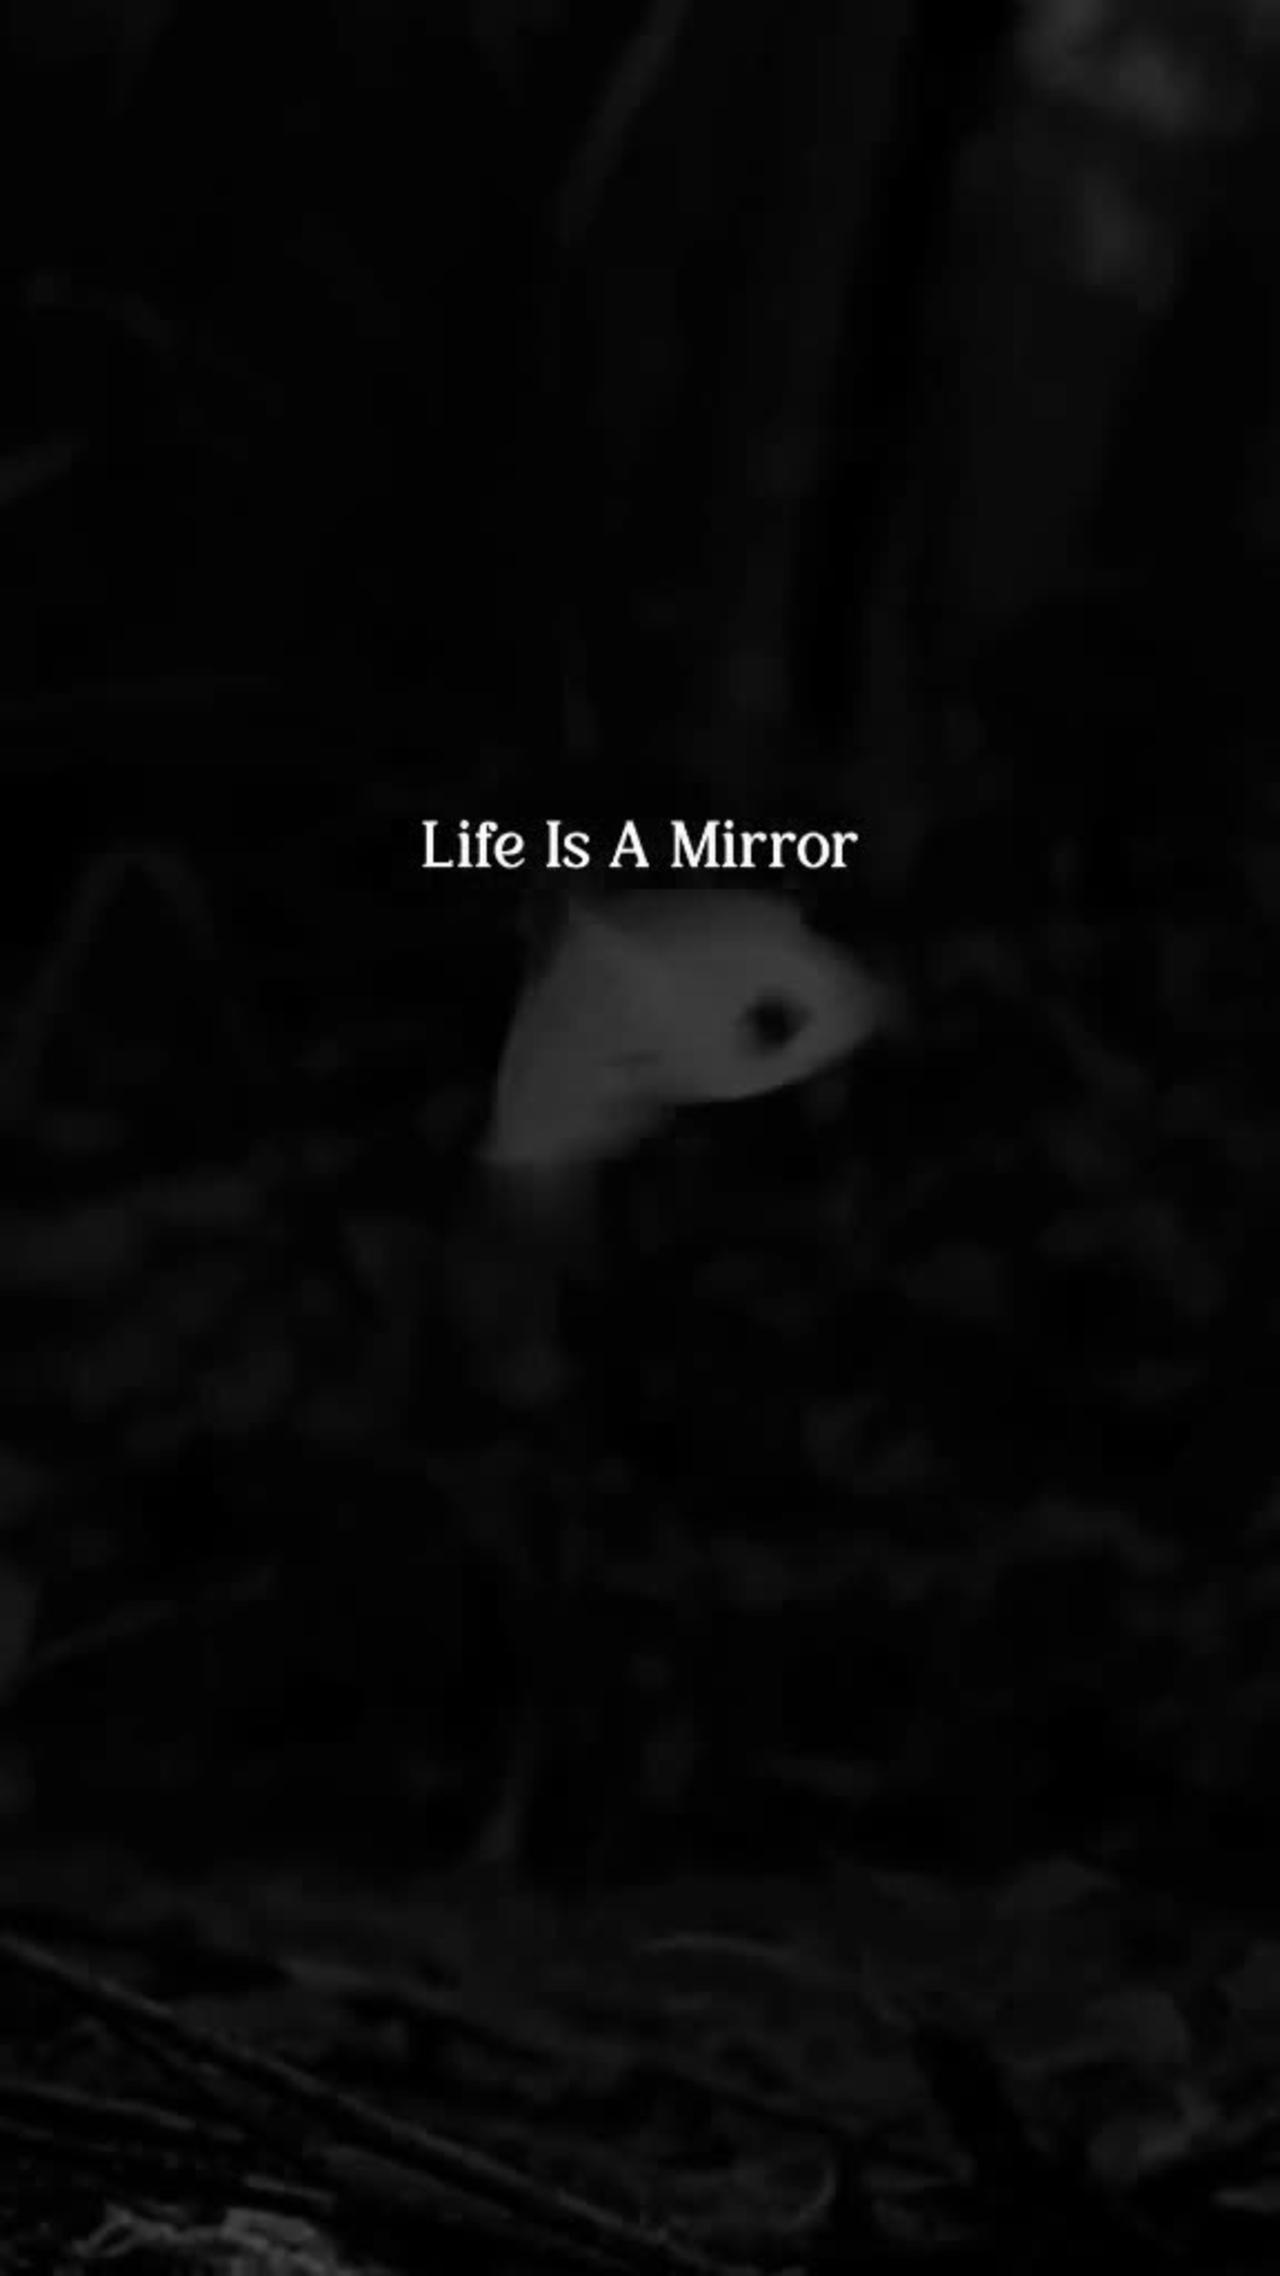 Life is a mirror